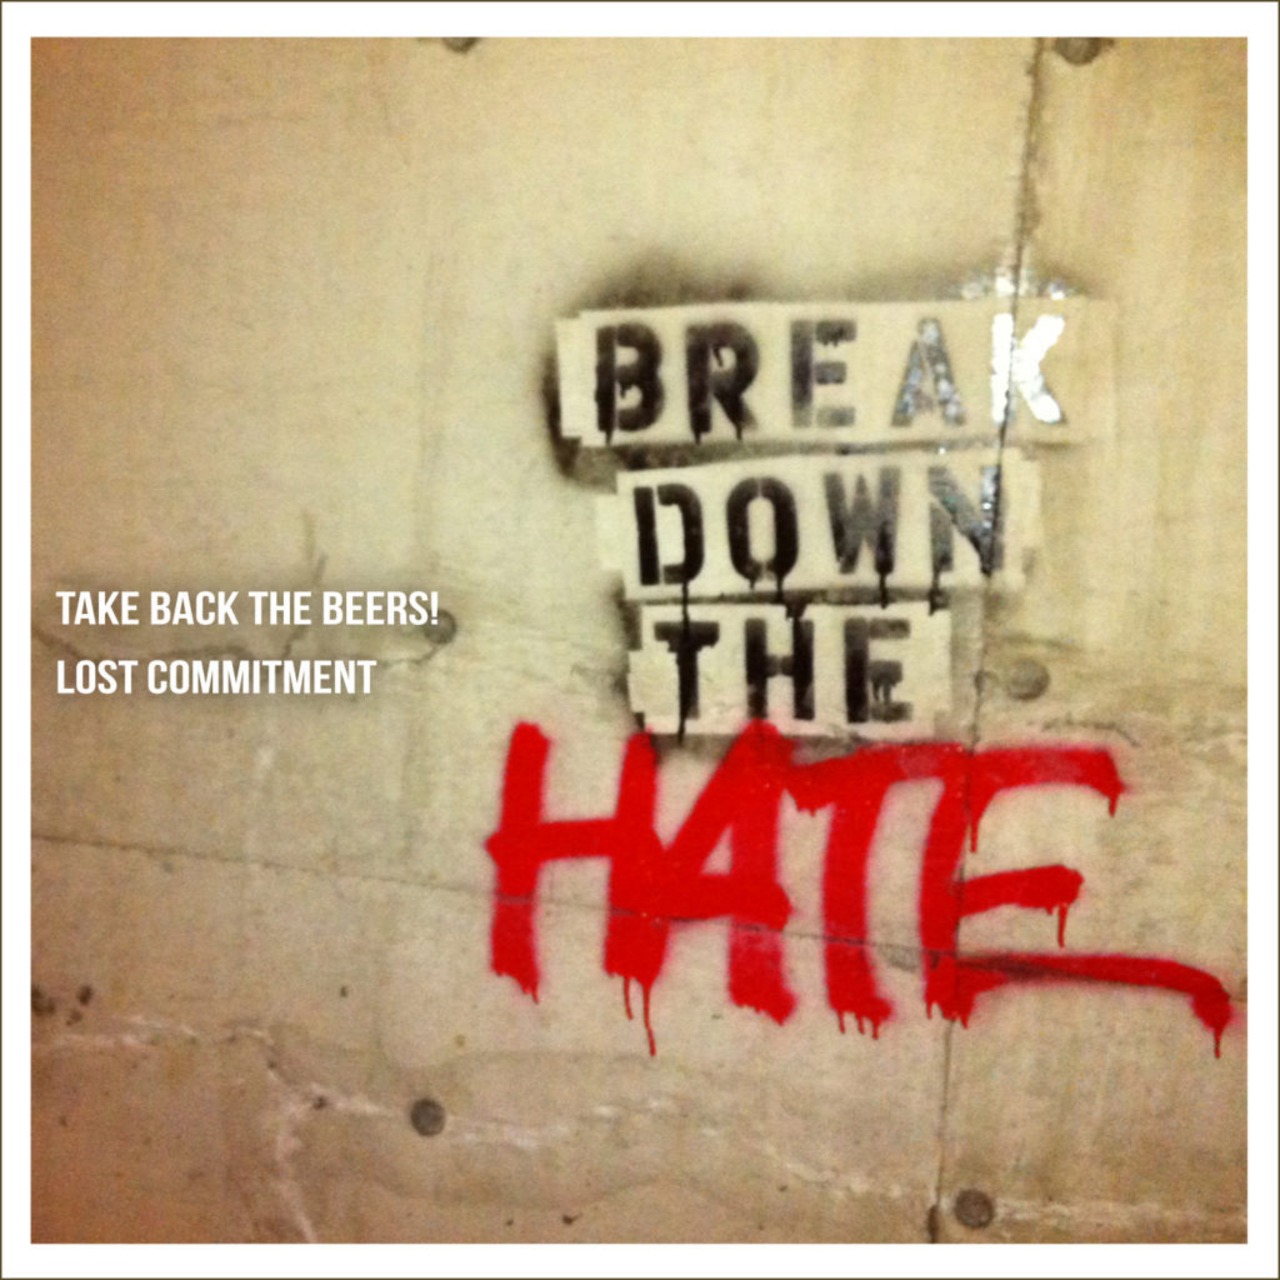 Take Back The Beers! & Lost Commitment / Break Down The Hate [CD]